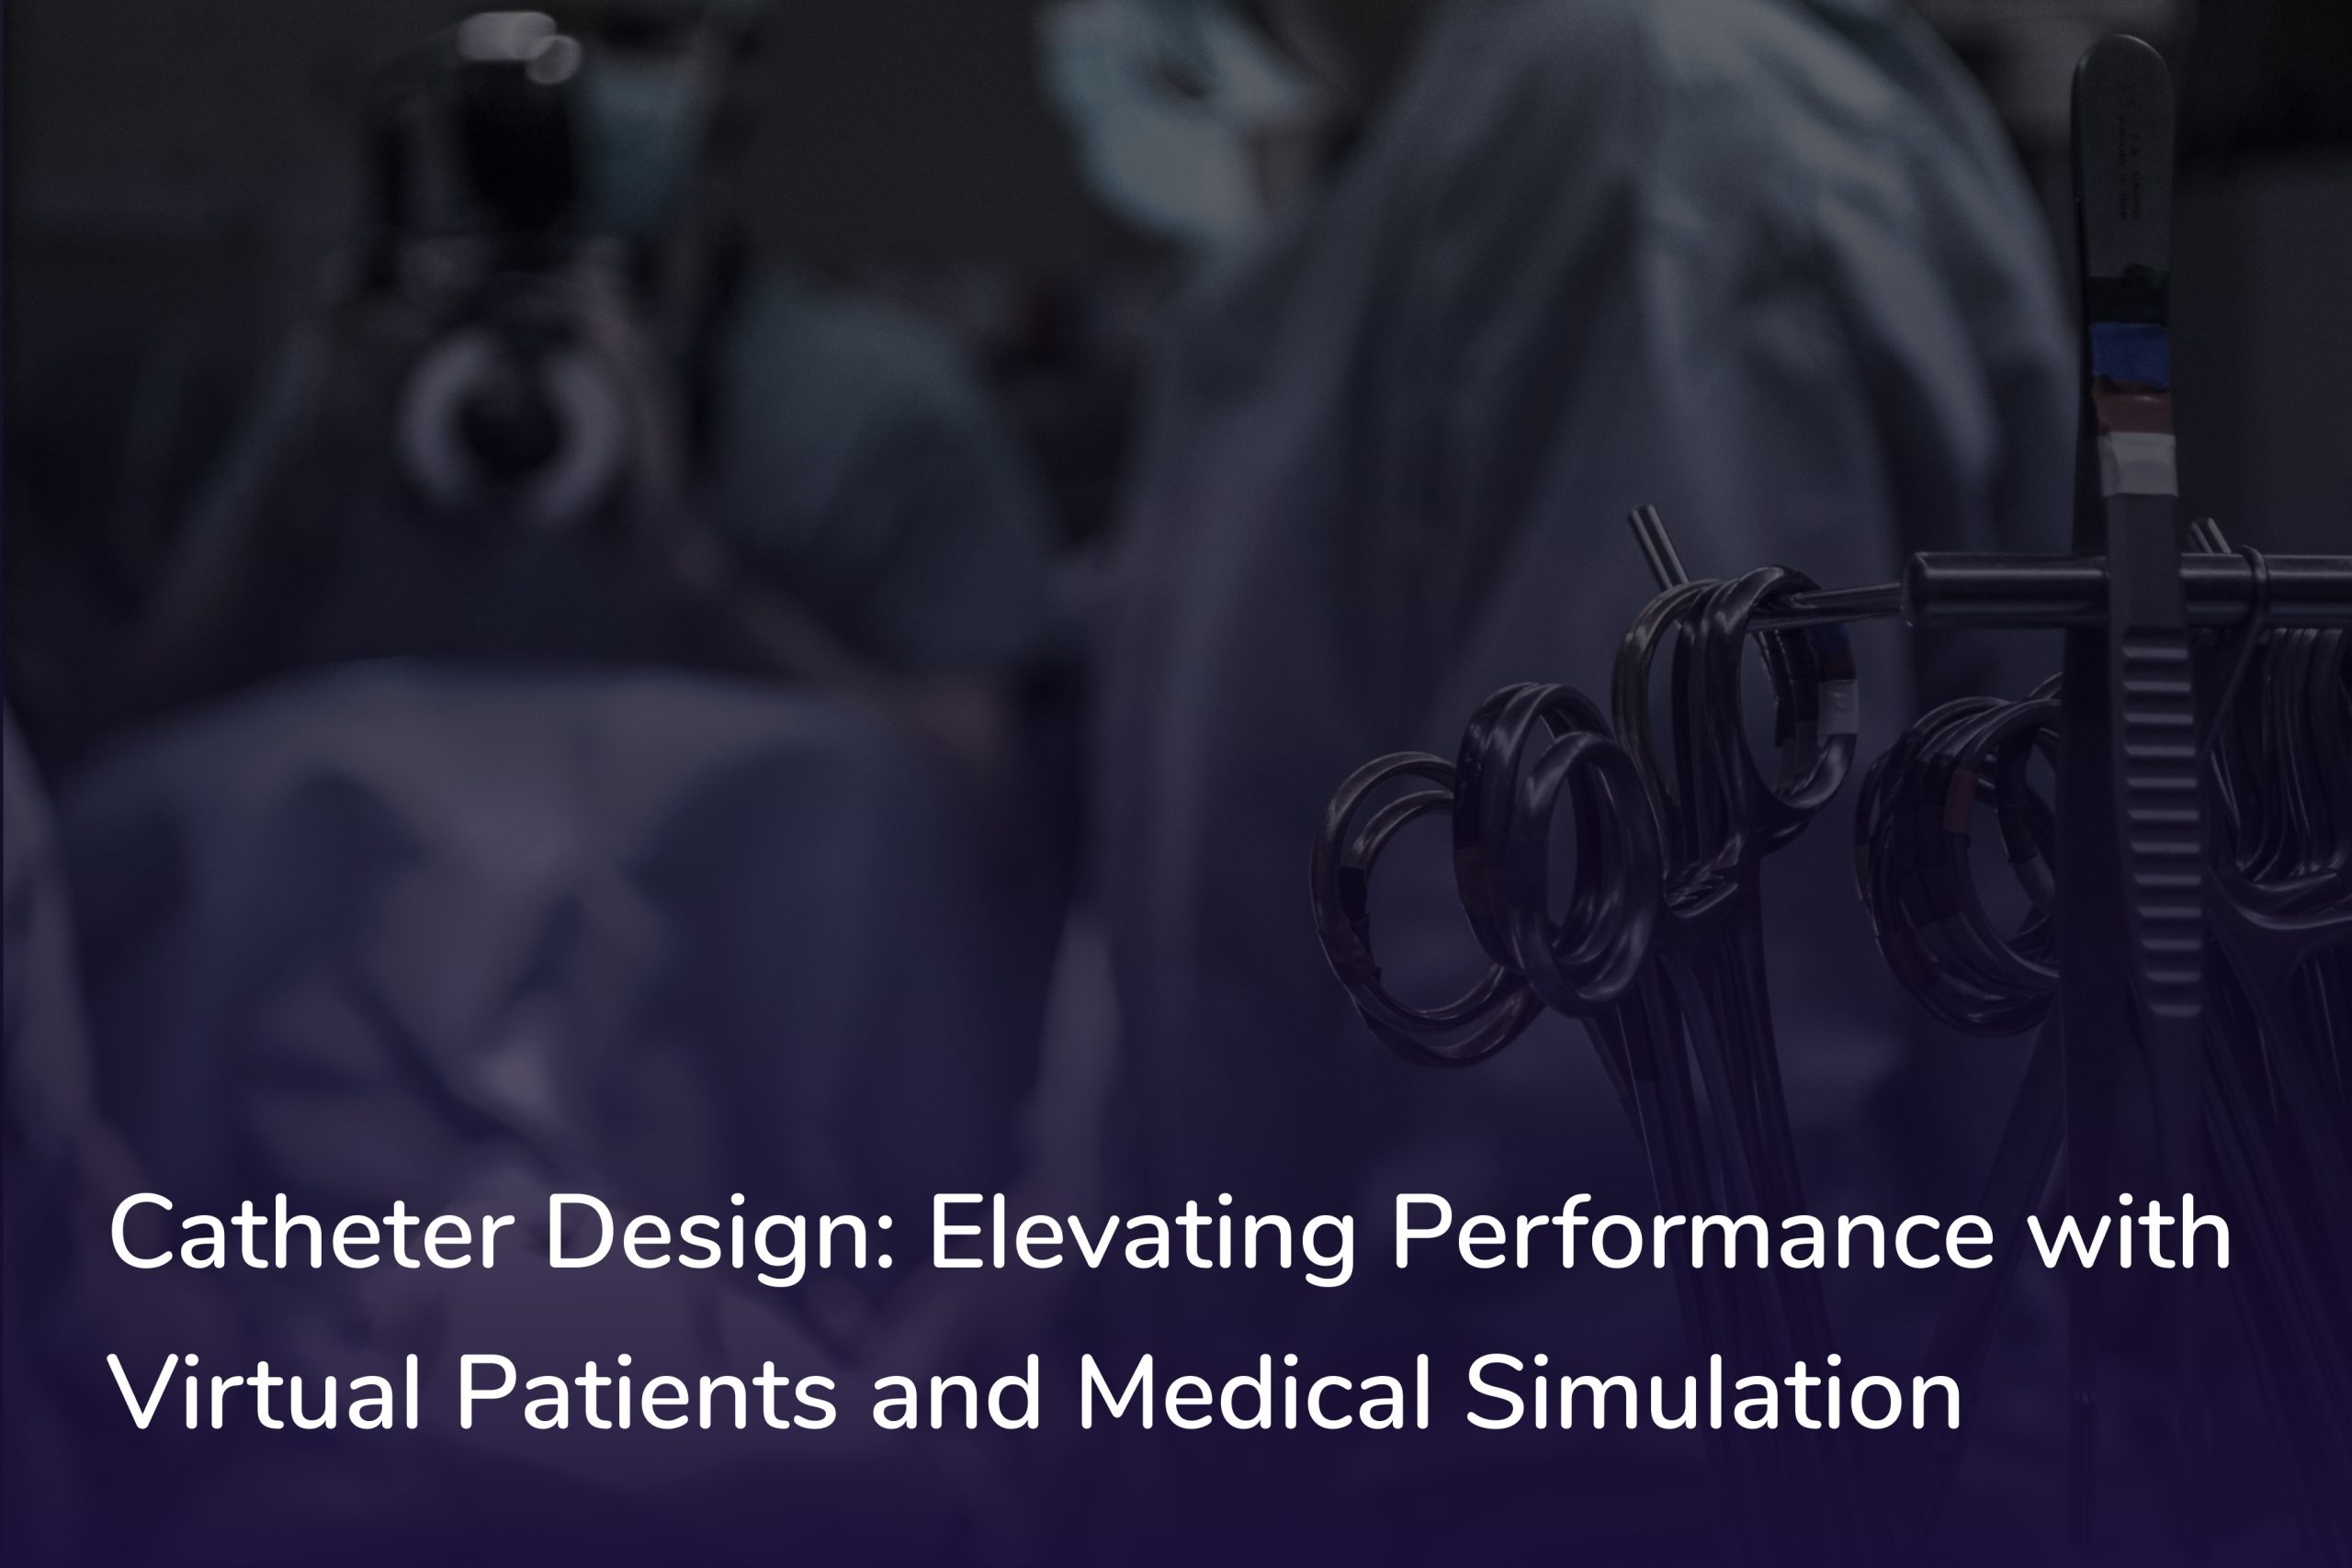 Catheter Design: Elevating Performance with Virtual Patients and Medical Simulation